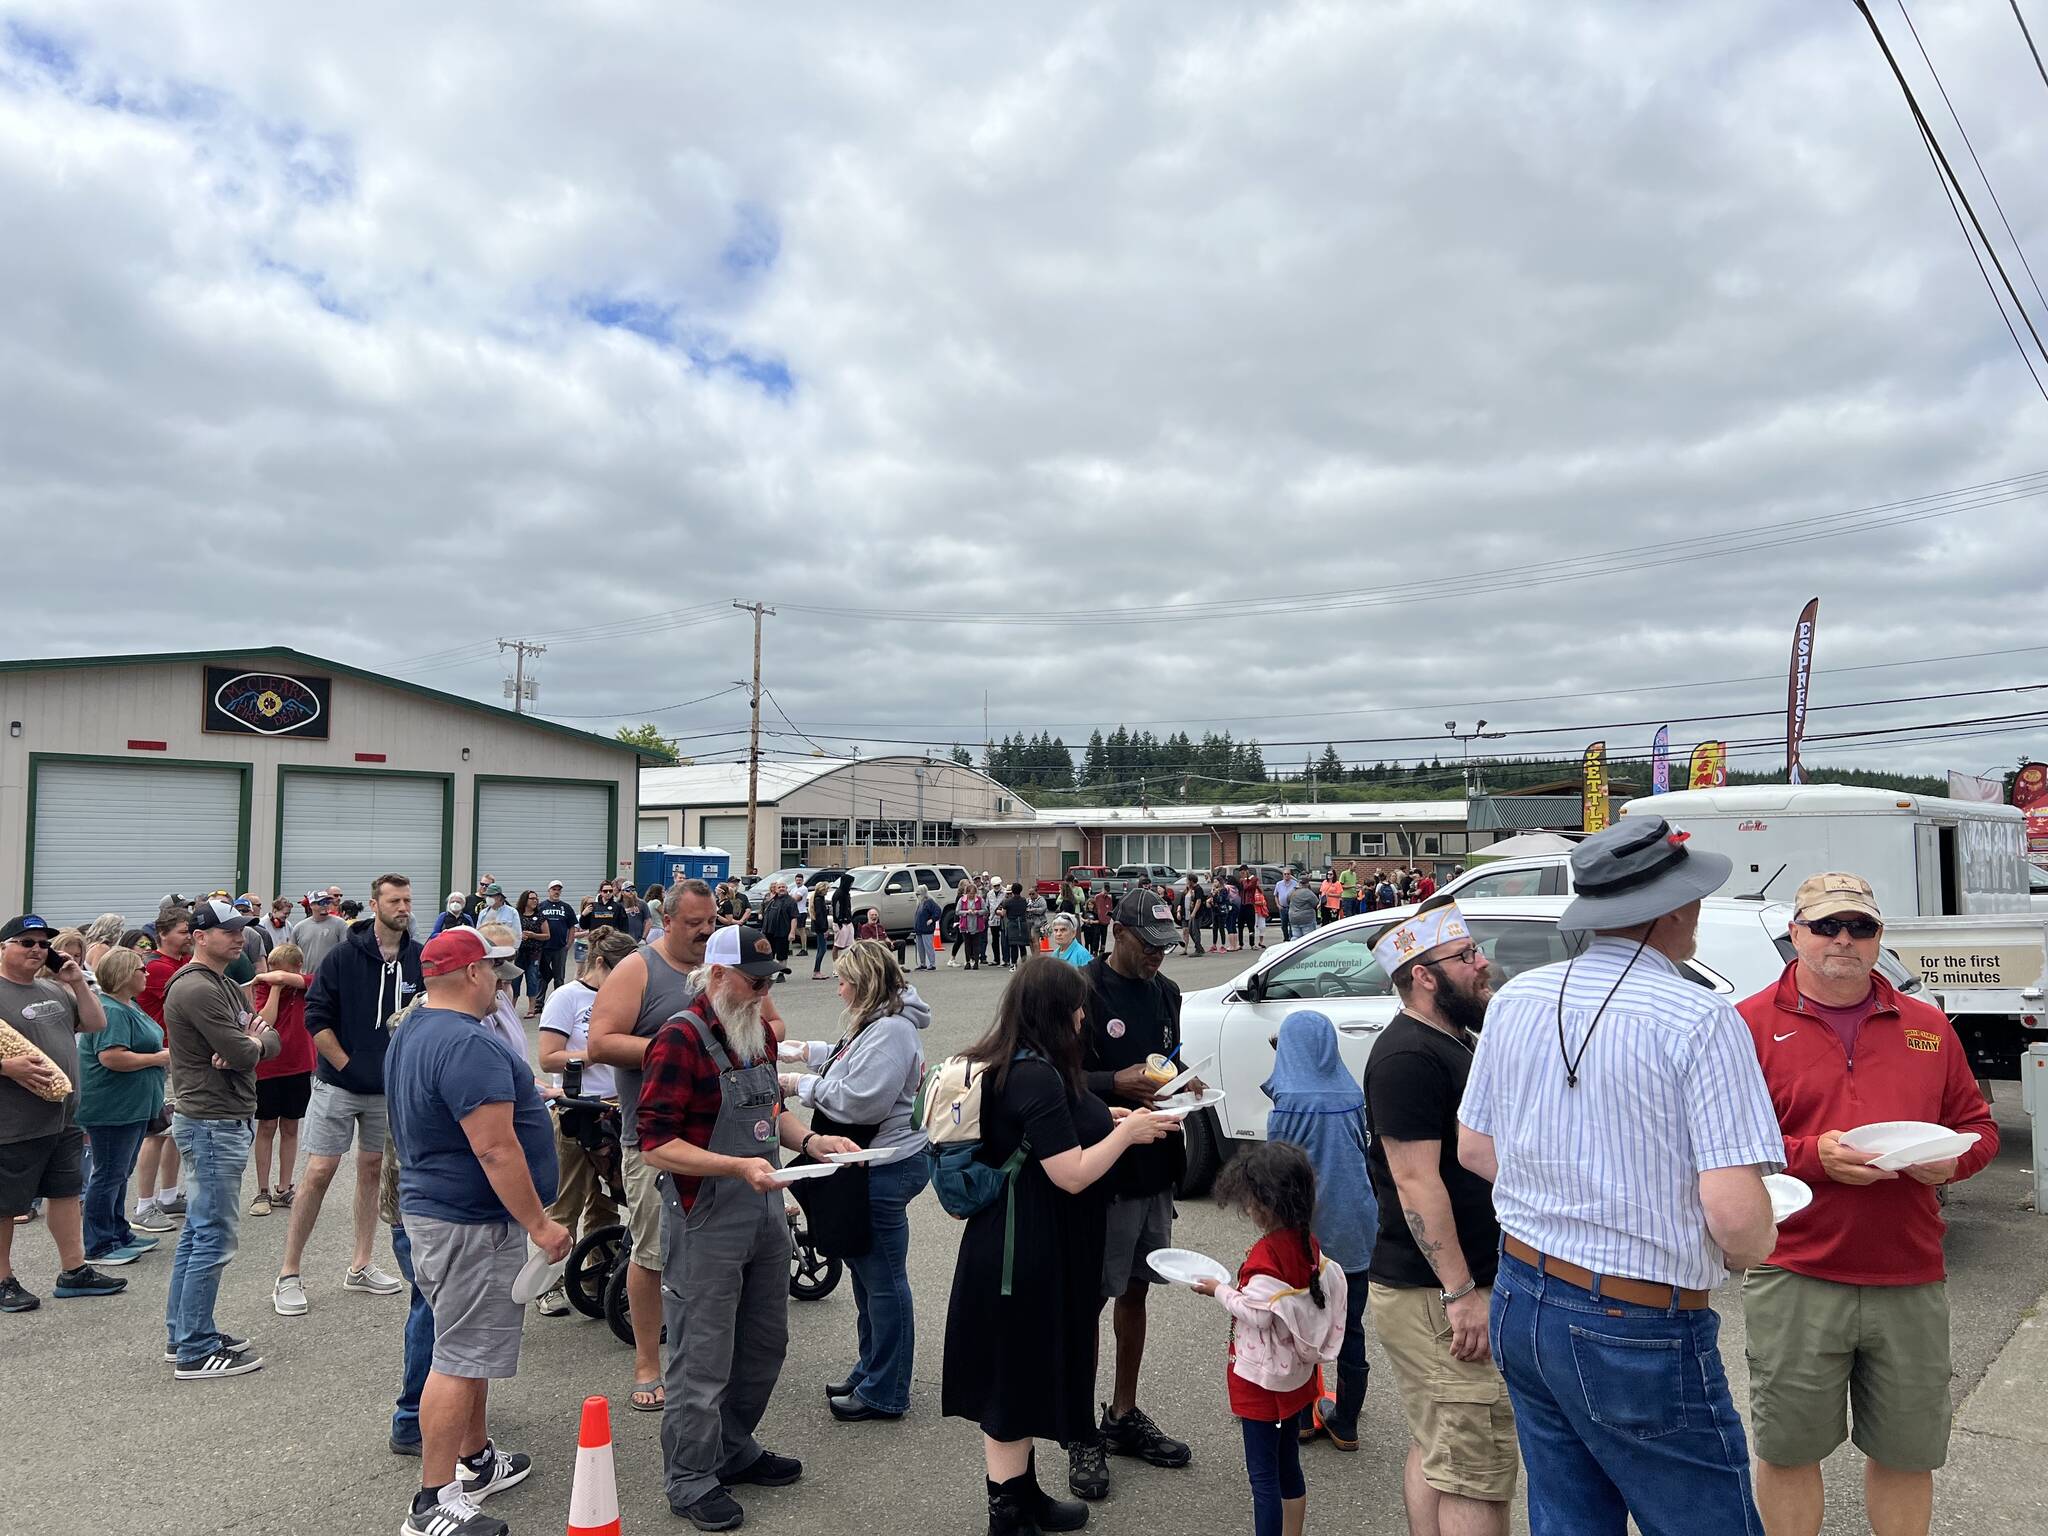 Clayton Franke / The Daily World
A line for stew stretches down the block at the McCleary Bear Festival on Saturday, July 8.